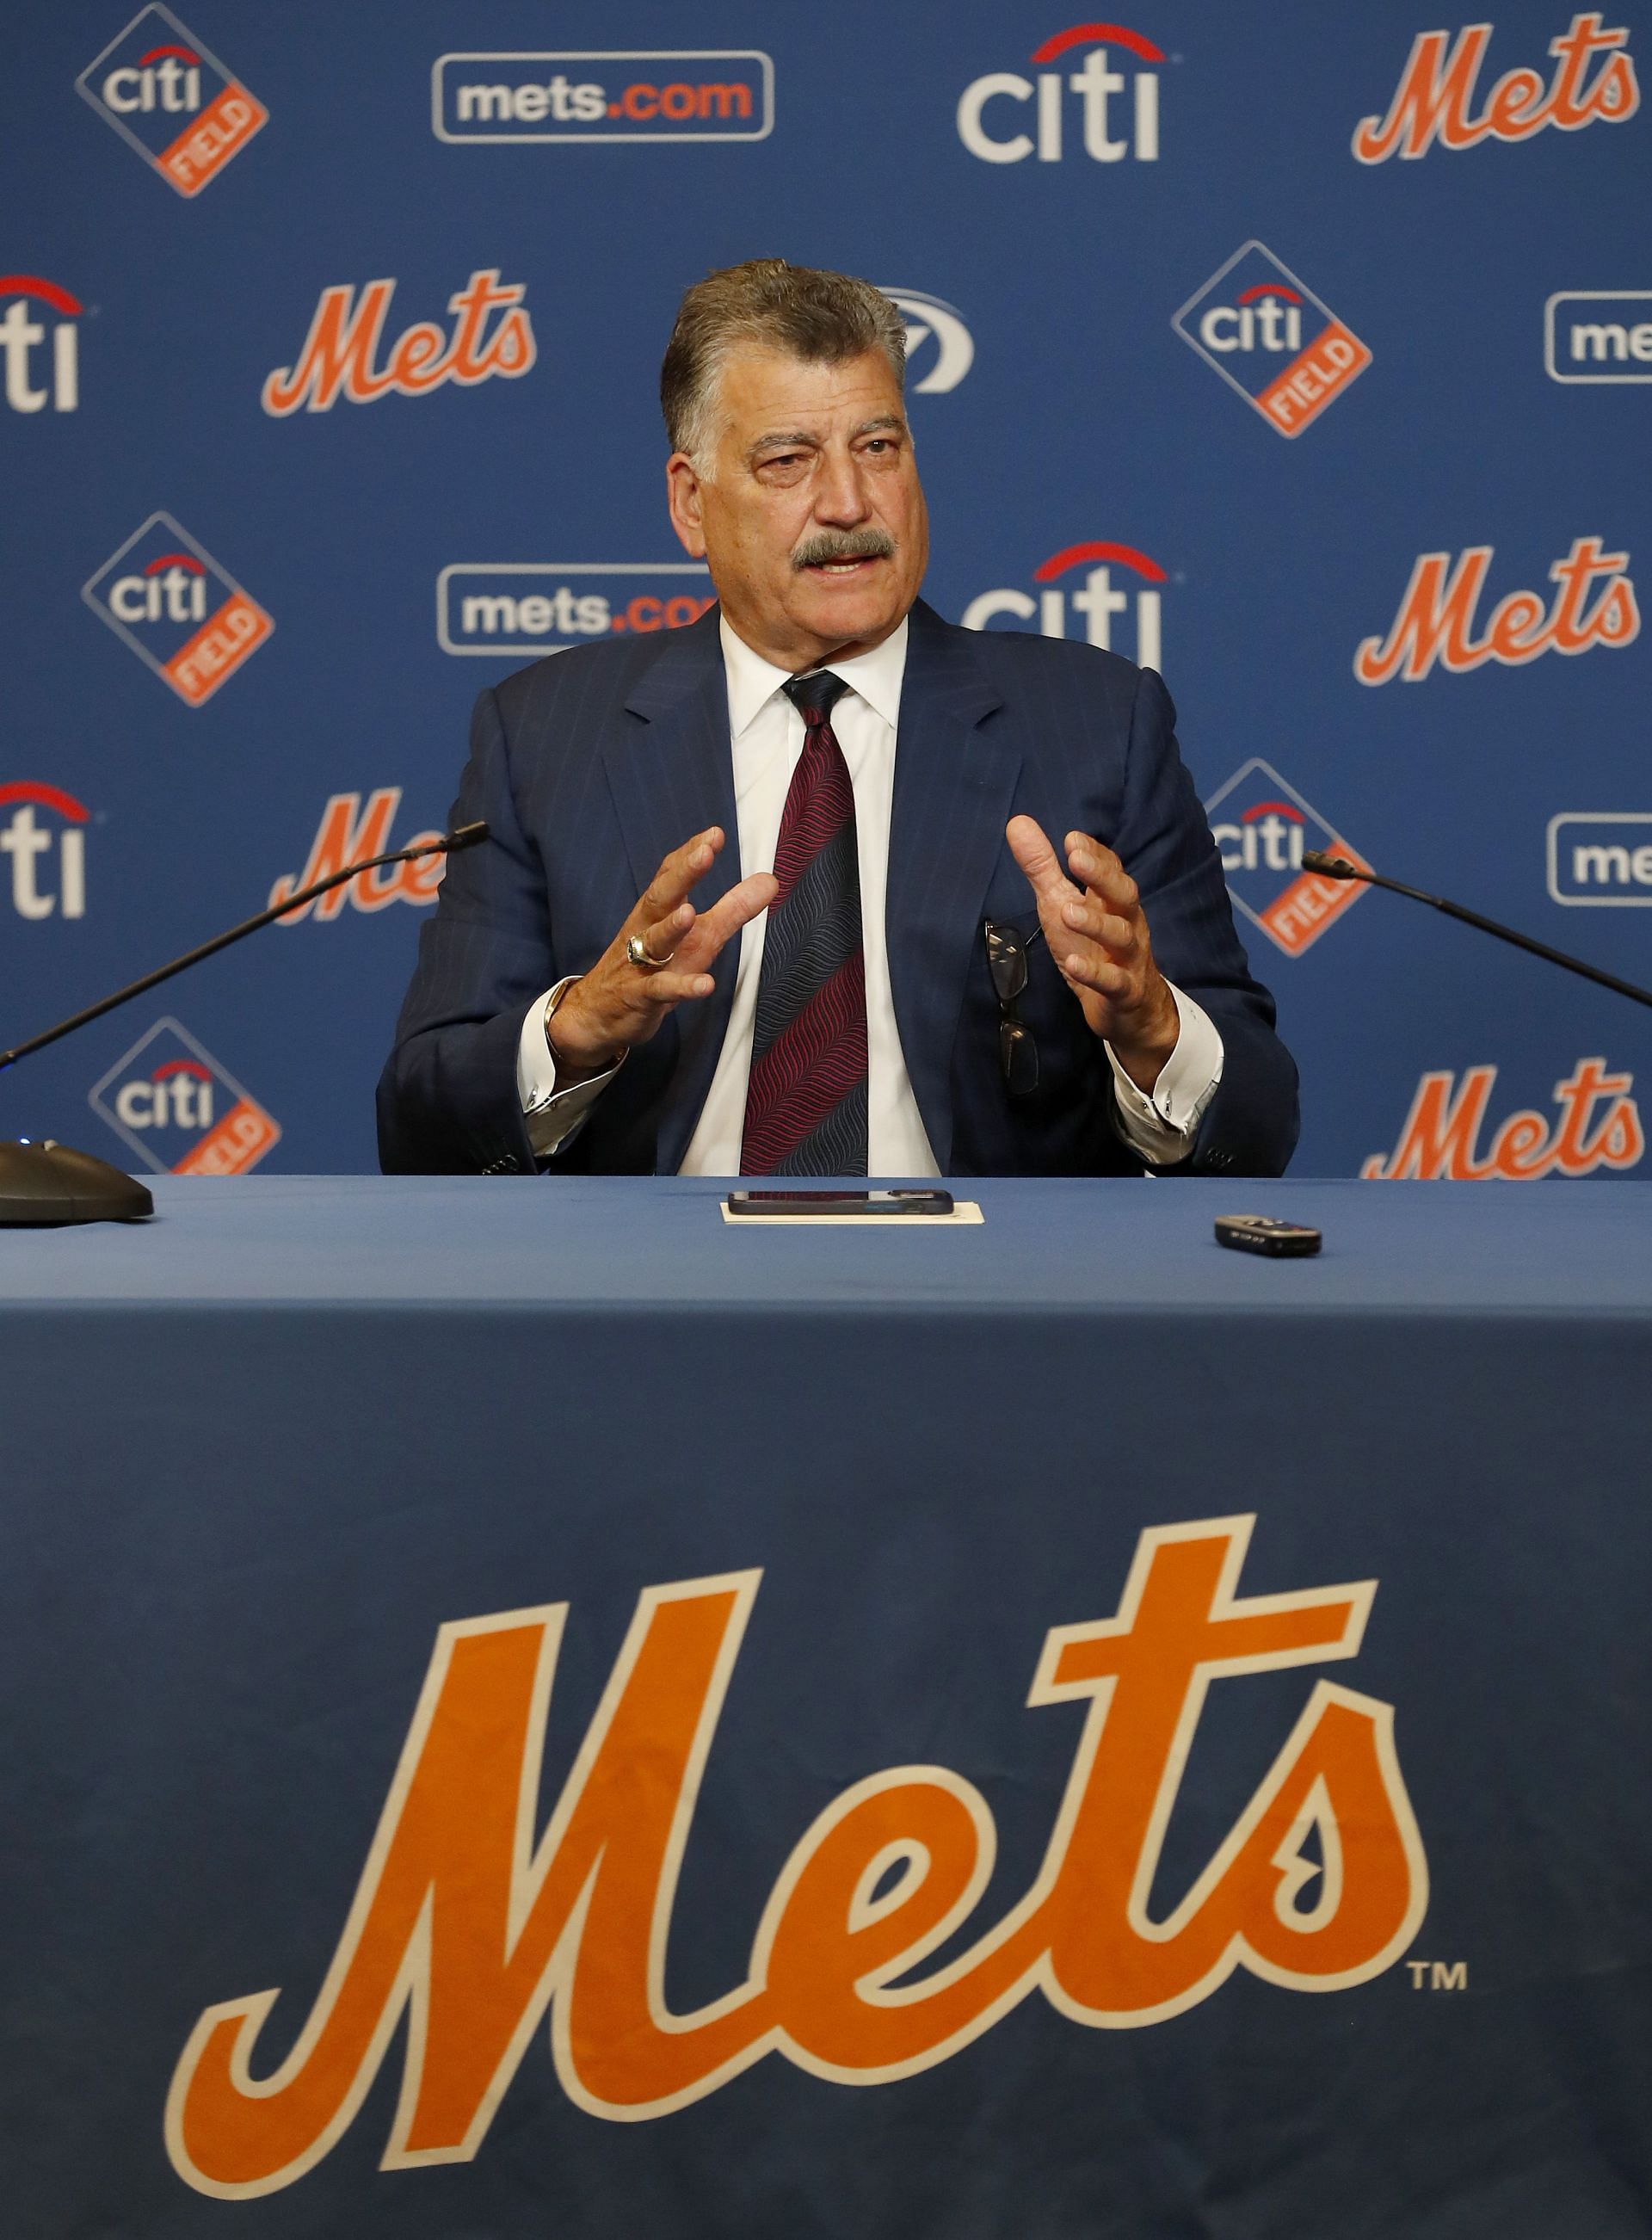 Former New York Met and current broadcaster Keith Hernandez speaks during a press conference before a game between the Mets and the Miami Marlins at Citi Field on July 09, 2022 in New York City. The team is retiring Hernandez&#039; #17 prior to the start of the game